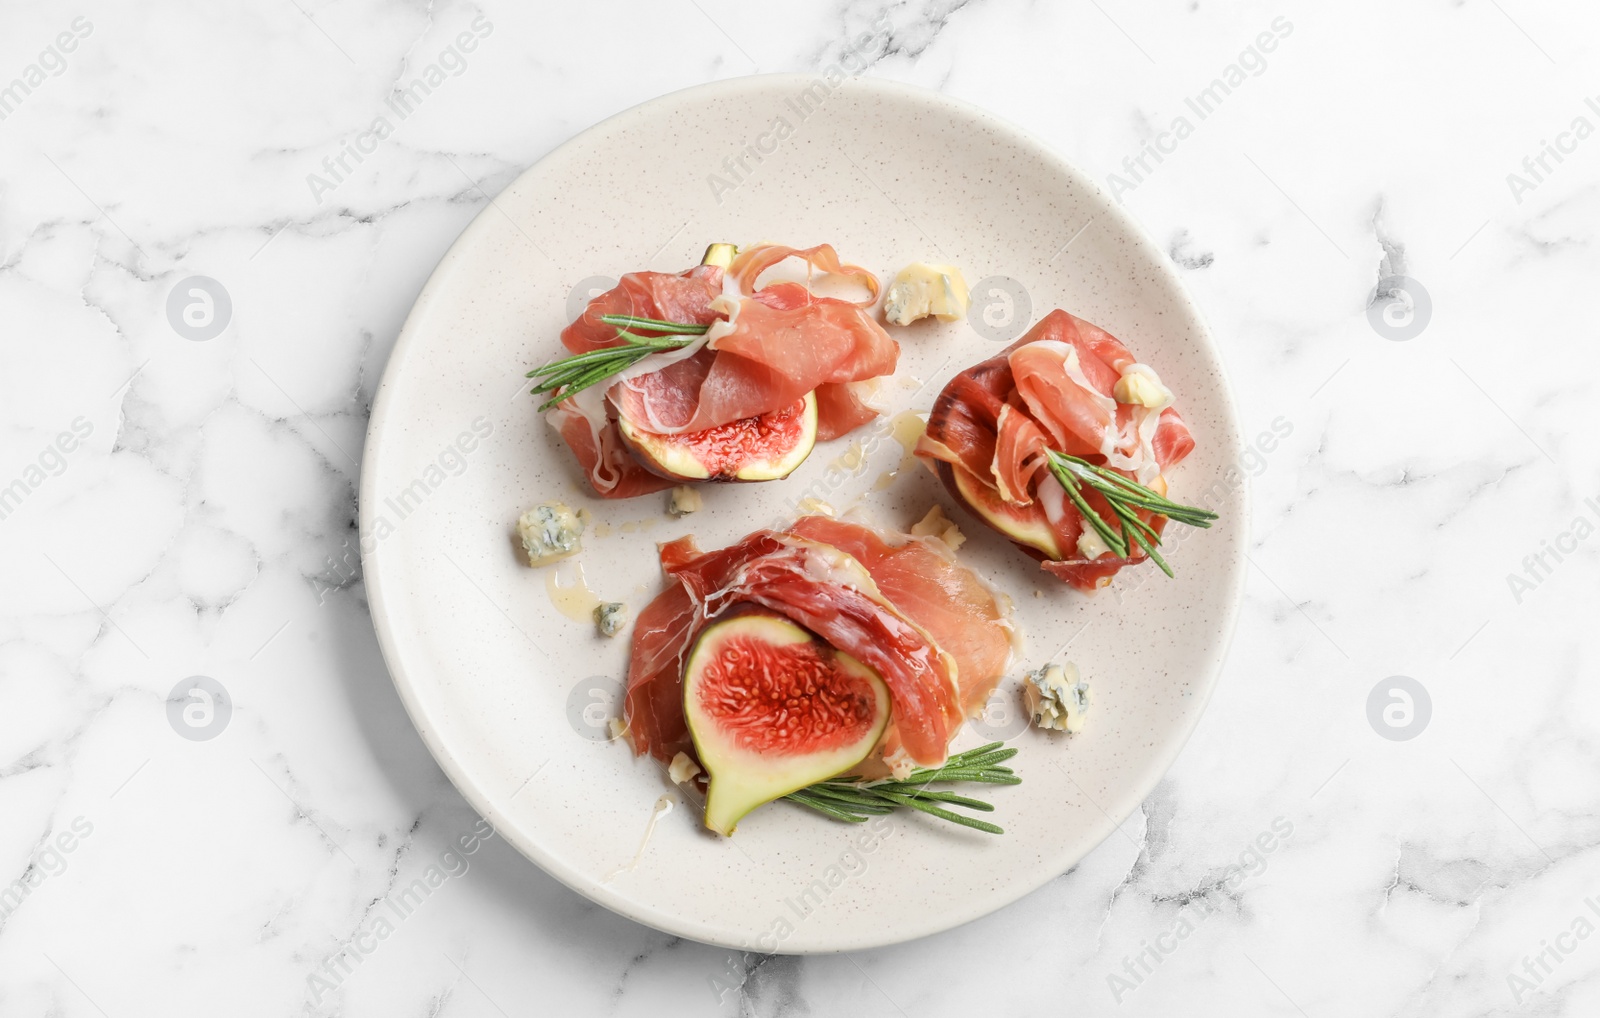 Photo of Delicious ripe figs and prosciutto served on white marble table, top view